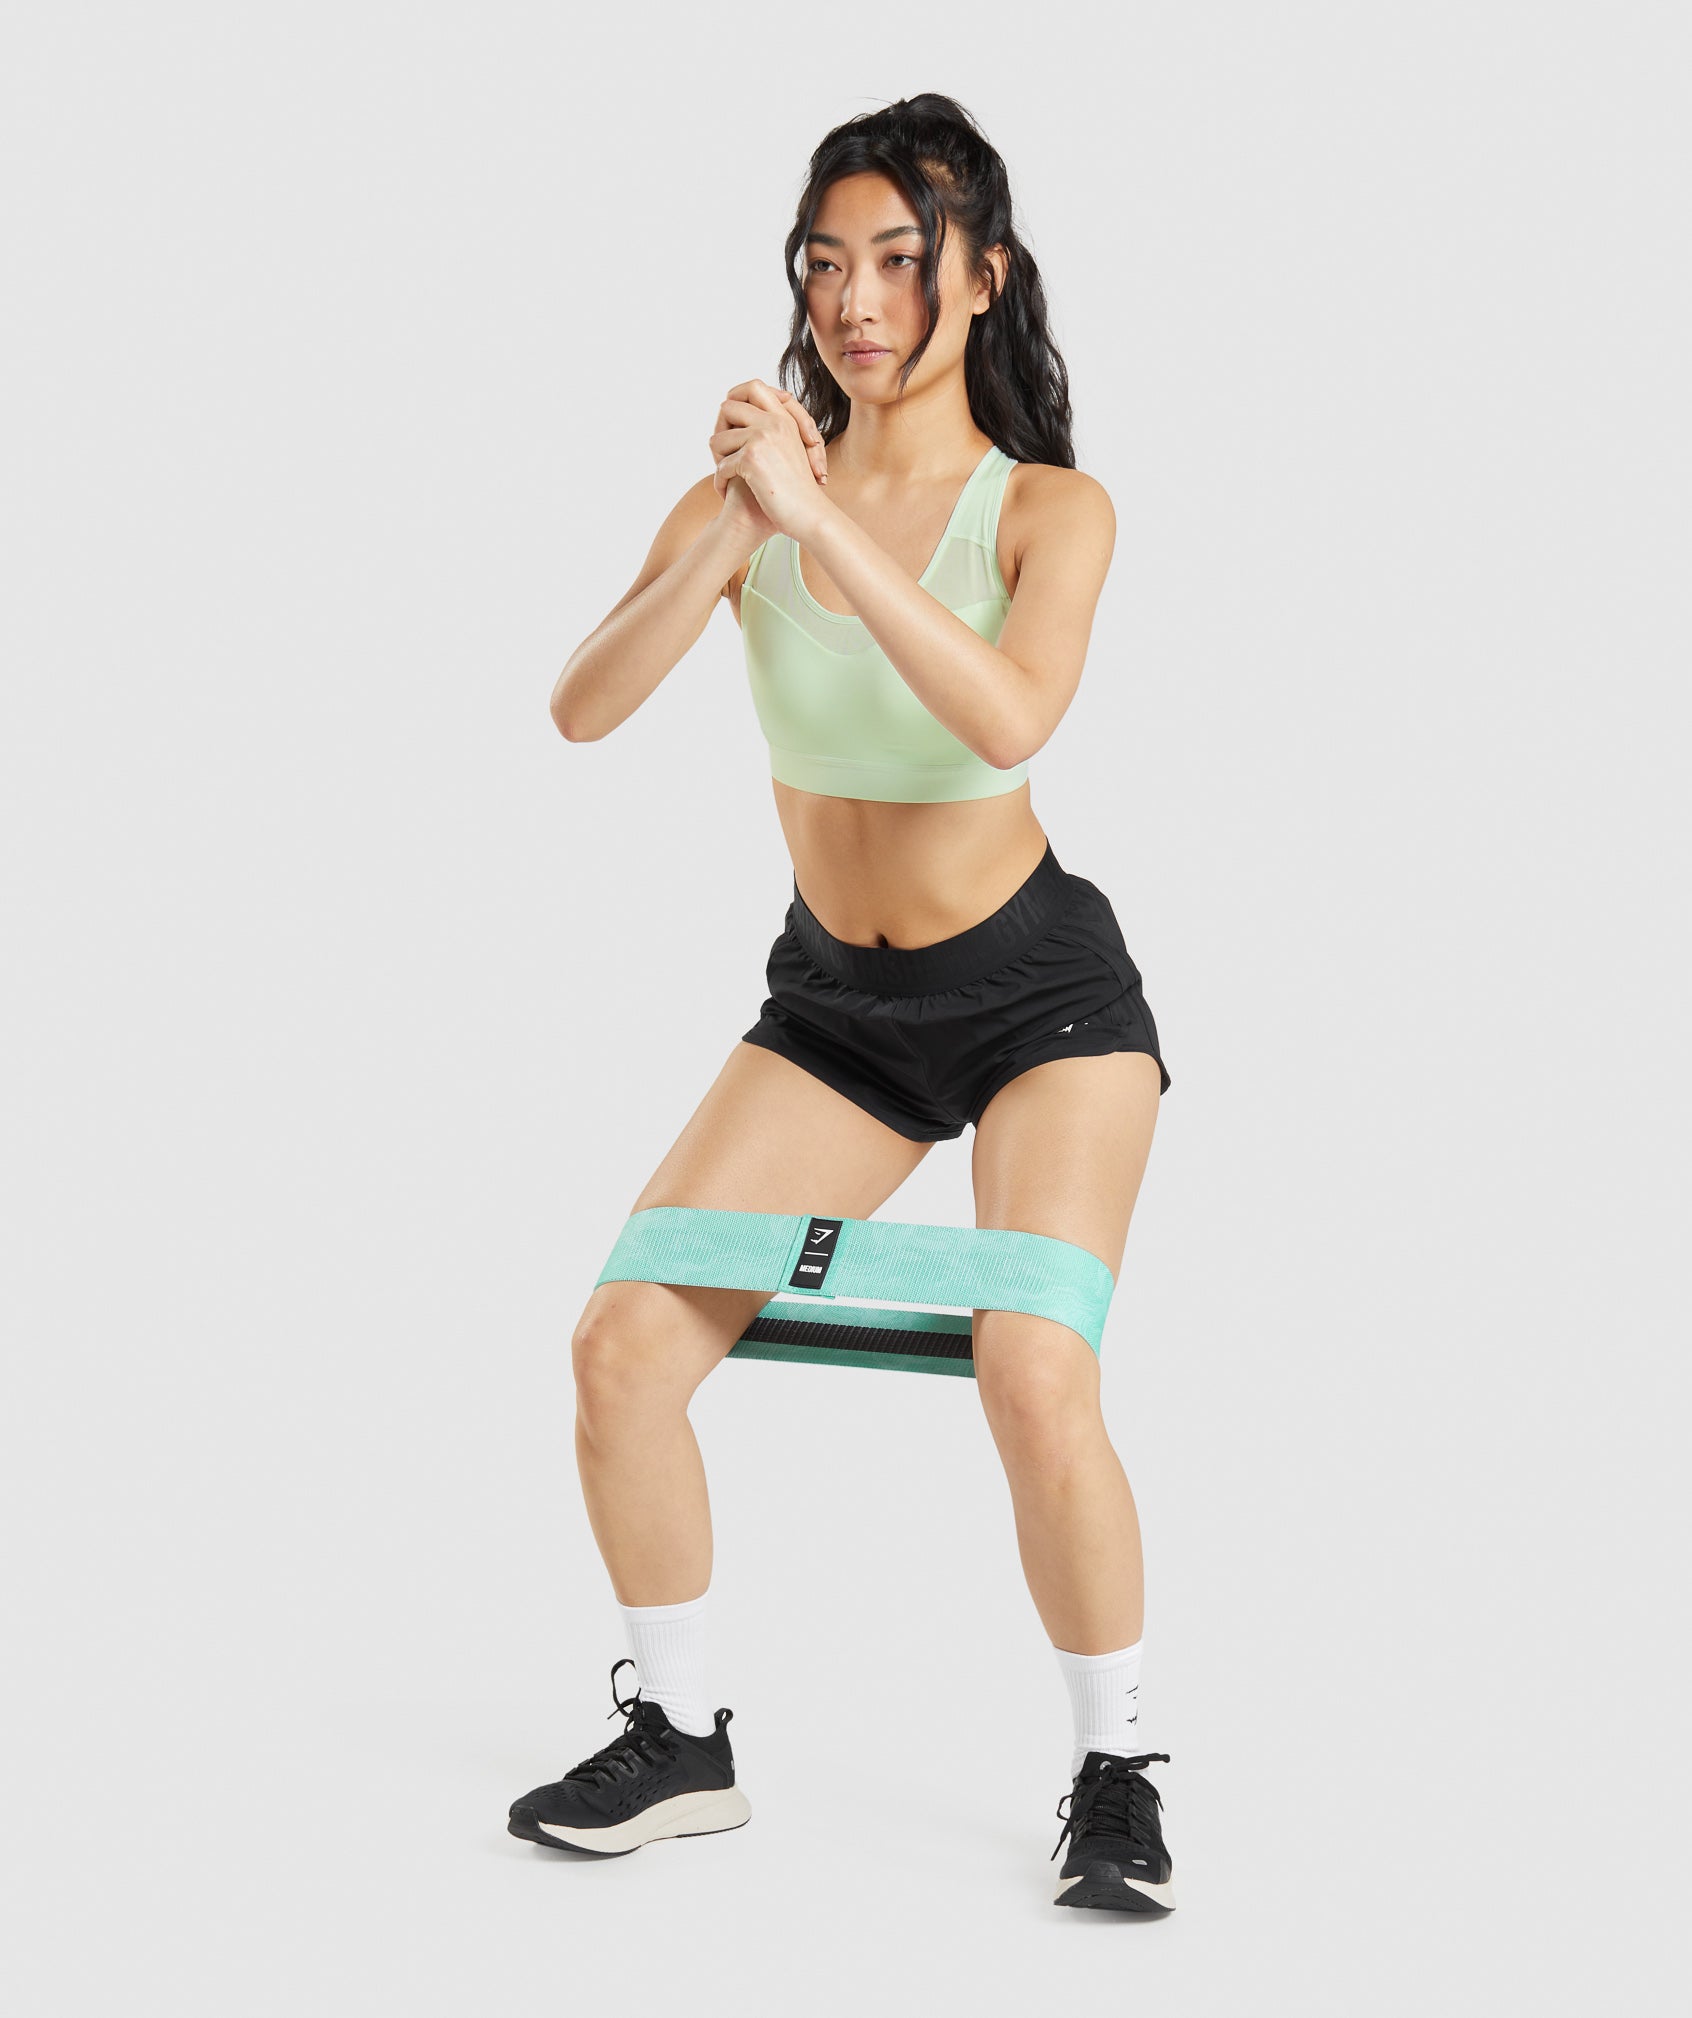 Medium Glute Band in Bright Turquoise Print - view 2